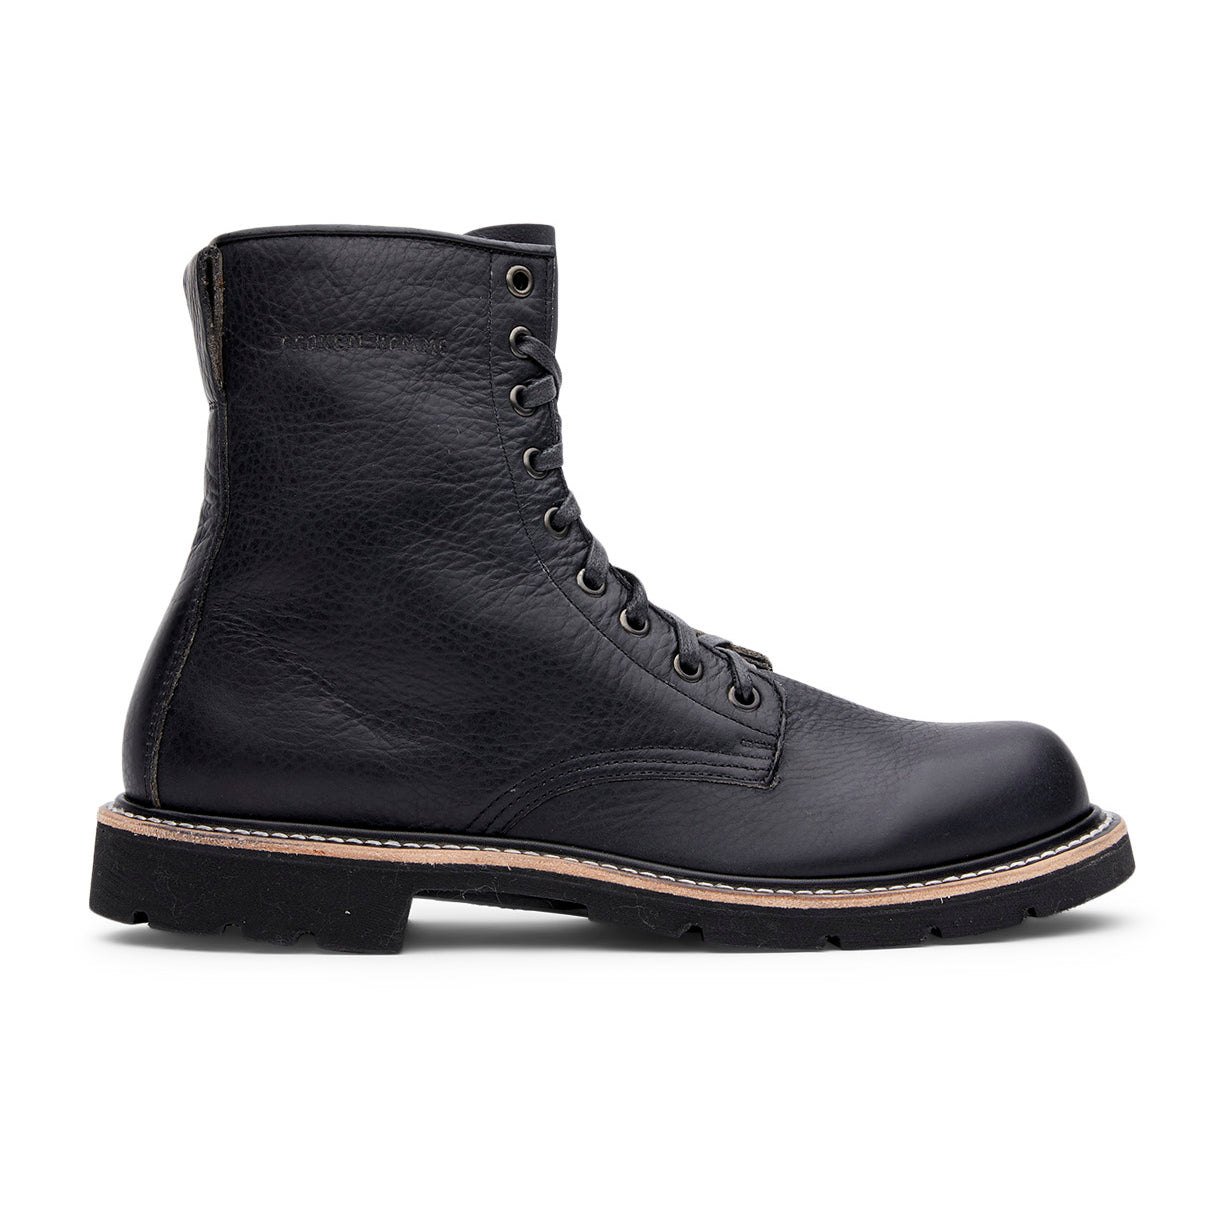 A black leather boot with a rubber sole, made with 360 full grain leather welt called Jacob by Broken Homme.